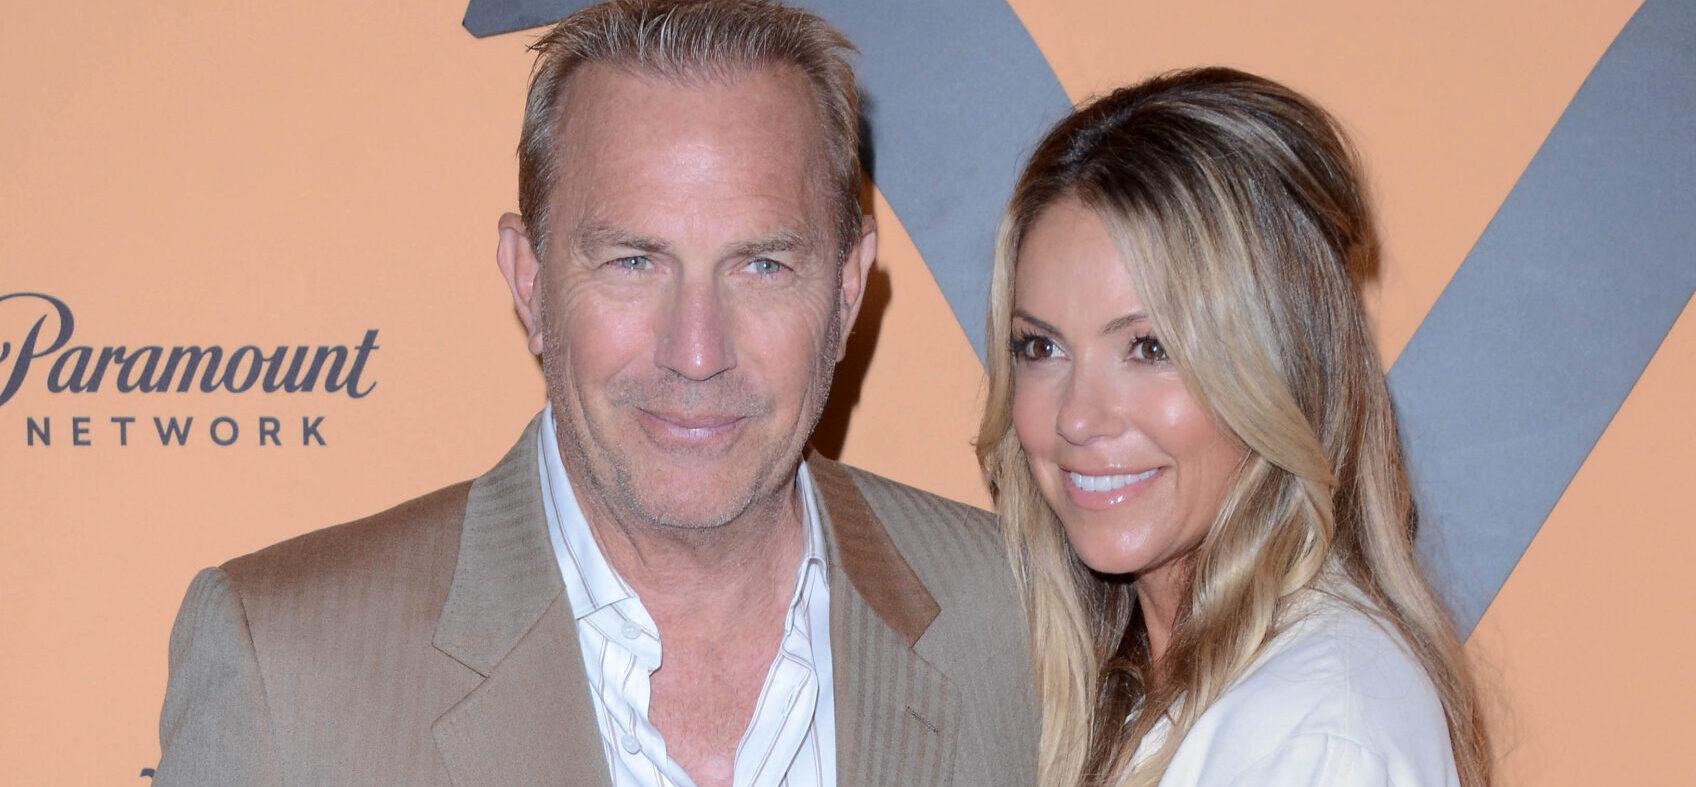 Kevin Costner ‘Still Has A Sweet Spot’ For Ex-Wife After Nasty Divorce, Friends Are Concerned